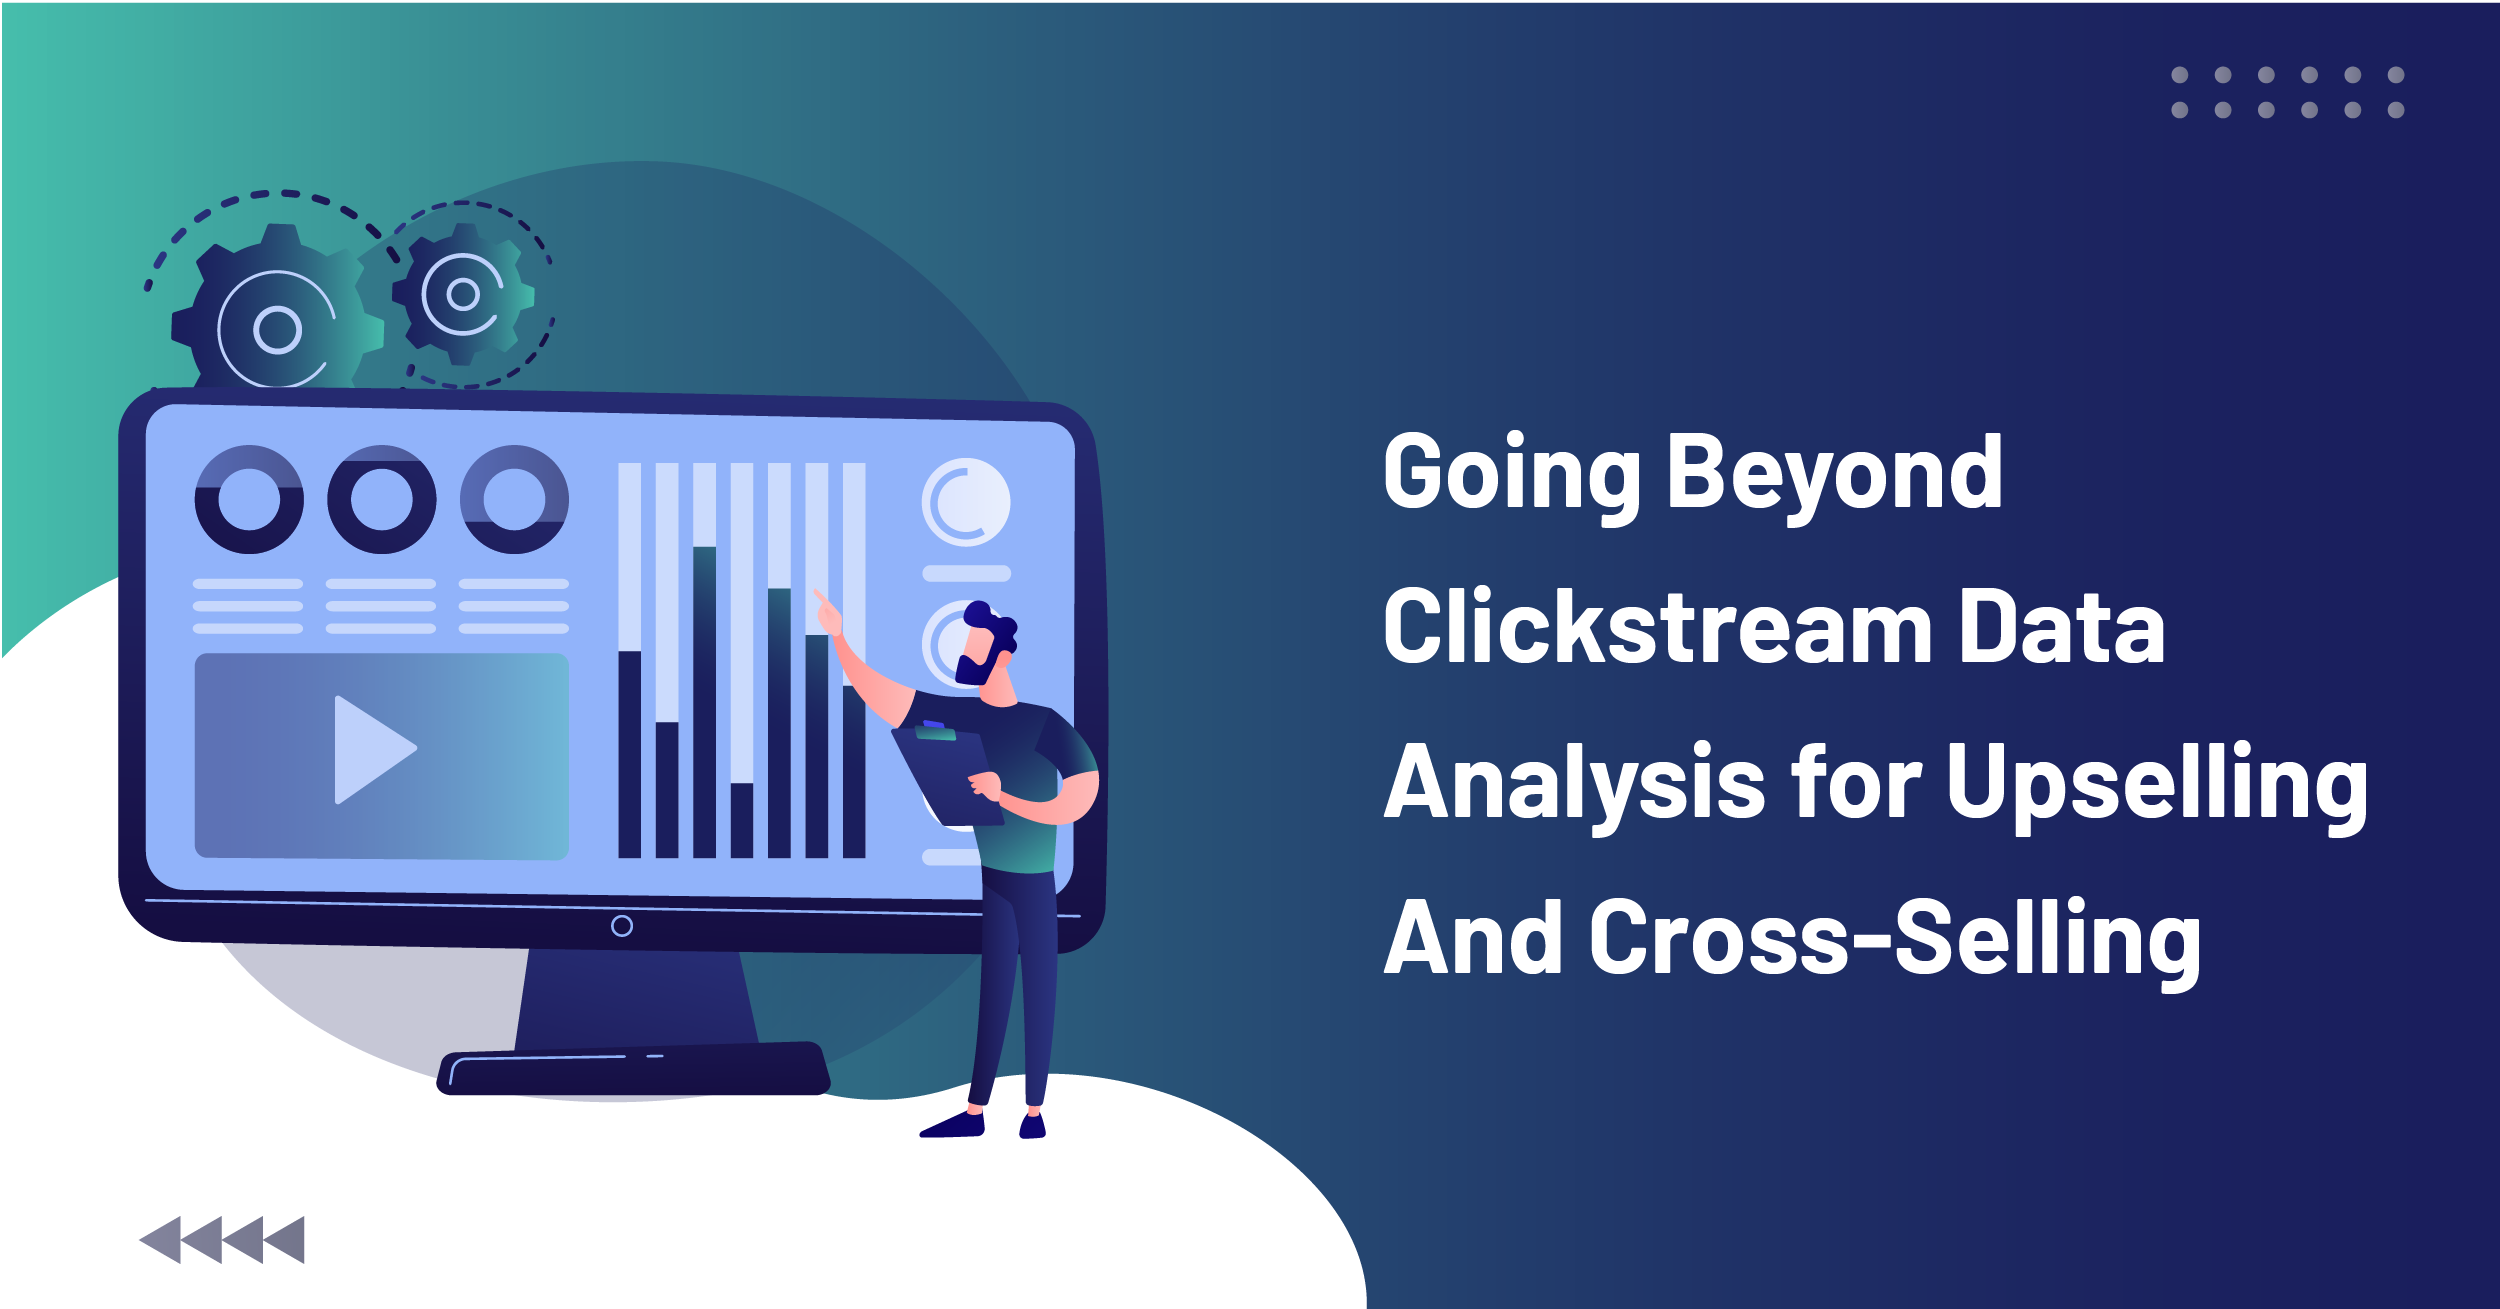 Going Beyond Clickstream Data Analysis for Upselling And Cross-Selling